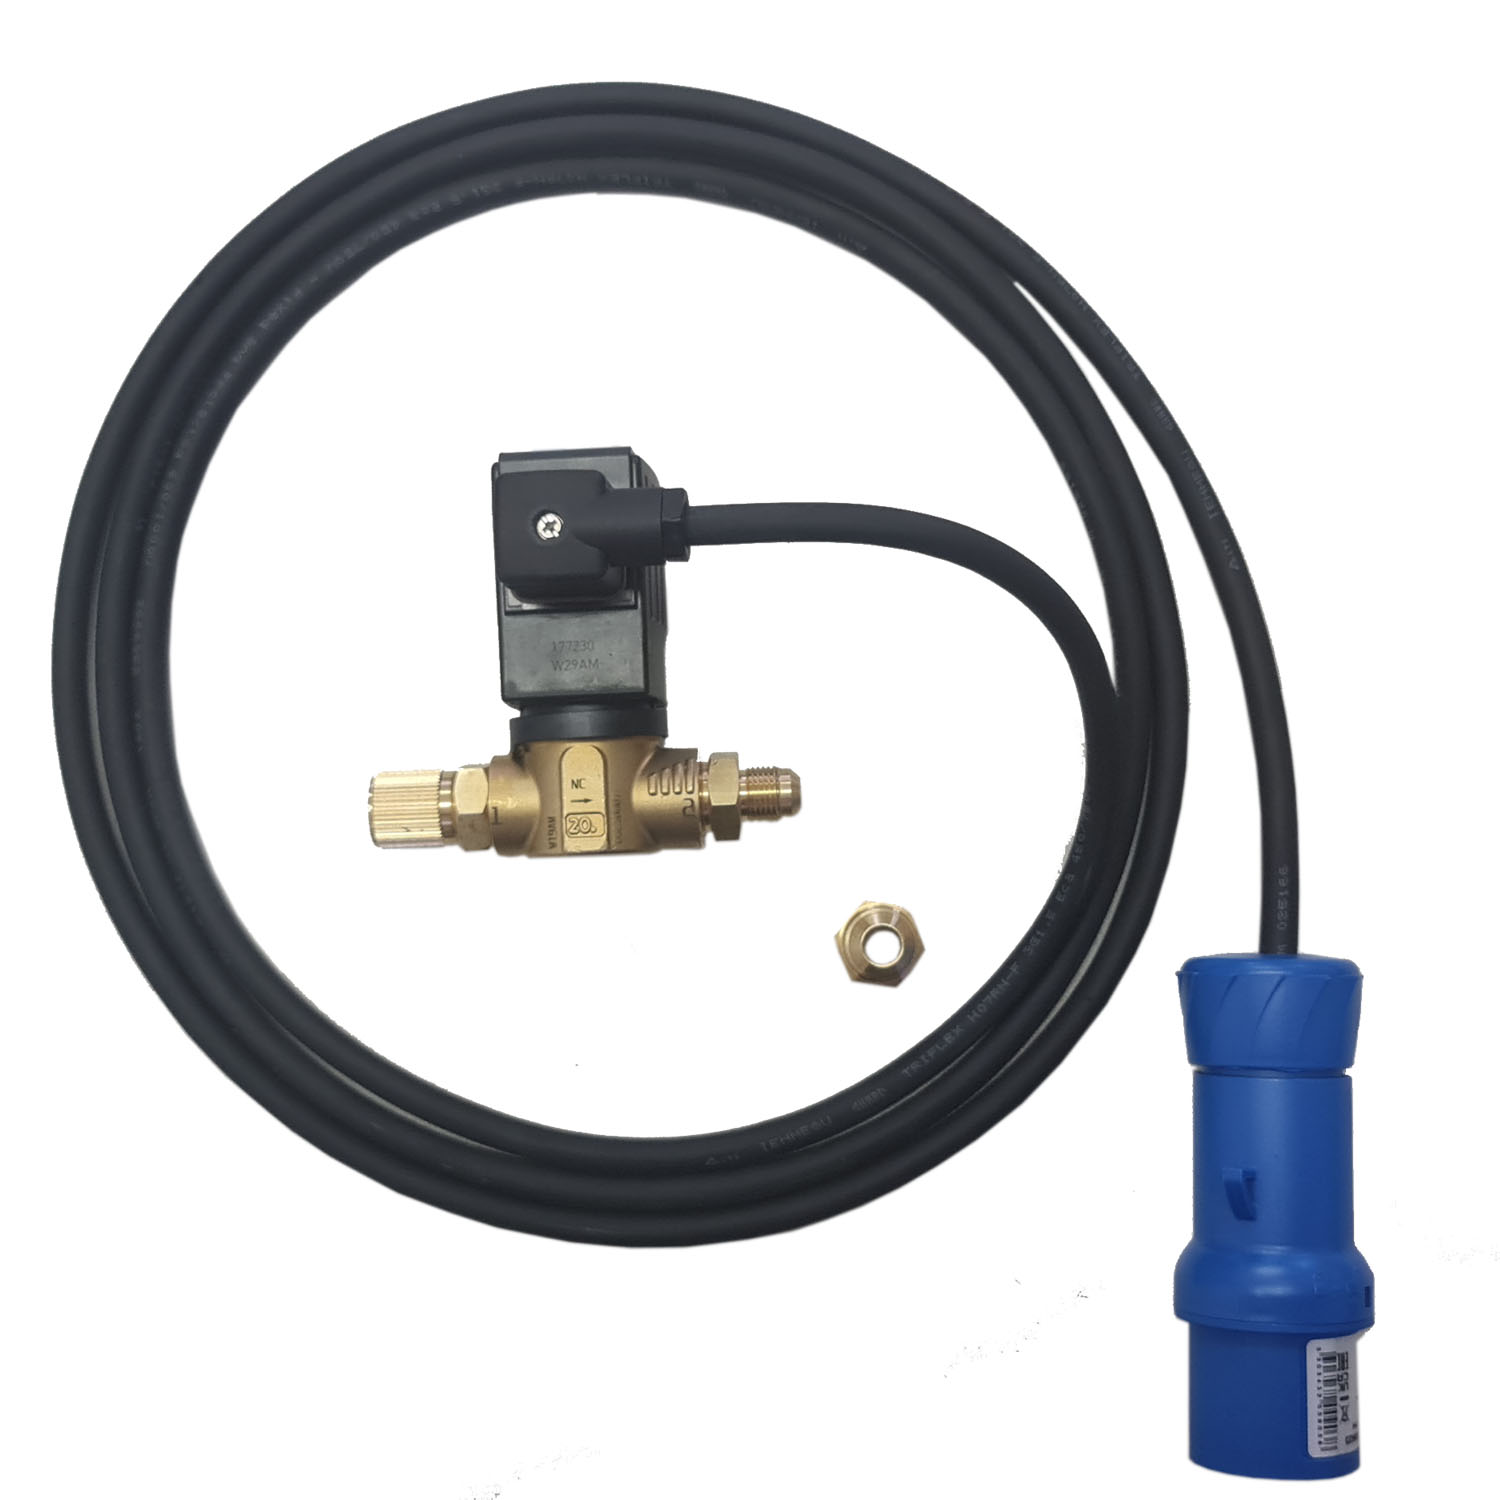 Professional Solenoid Valve Kit for Fieldpiece Vacuum Pumps - connection 3/8 SAE for pump, connection ⅜ SAE for vacuum hose (1/2 SAE male outlet fitting included)